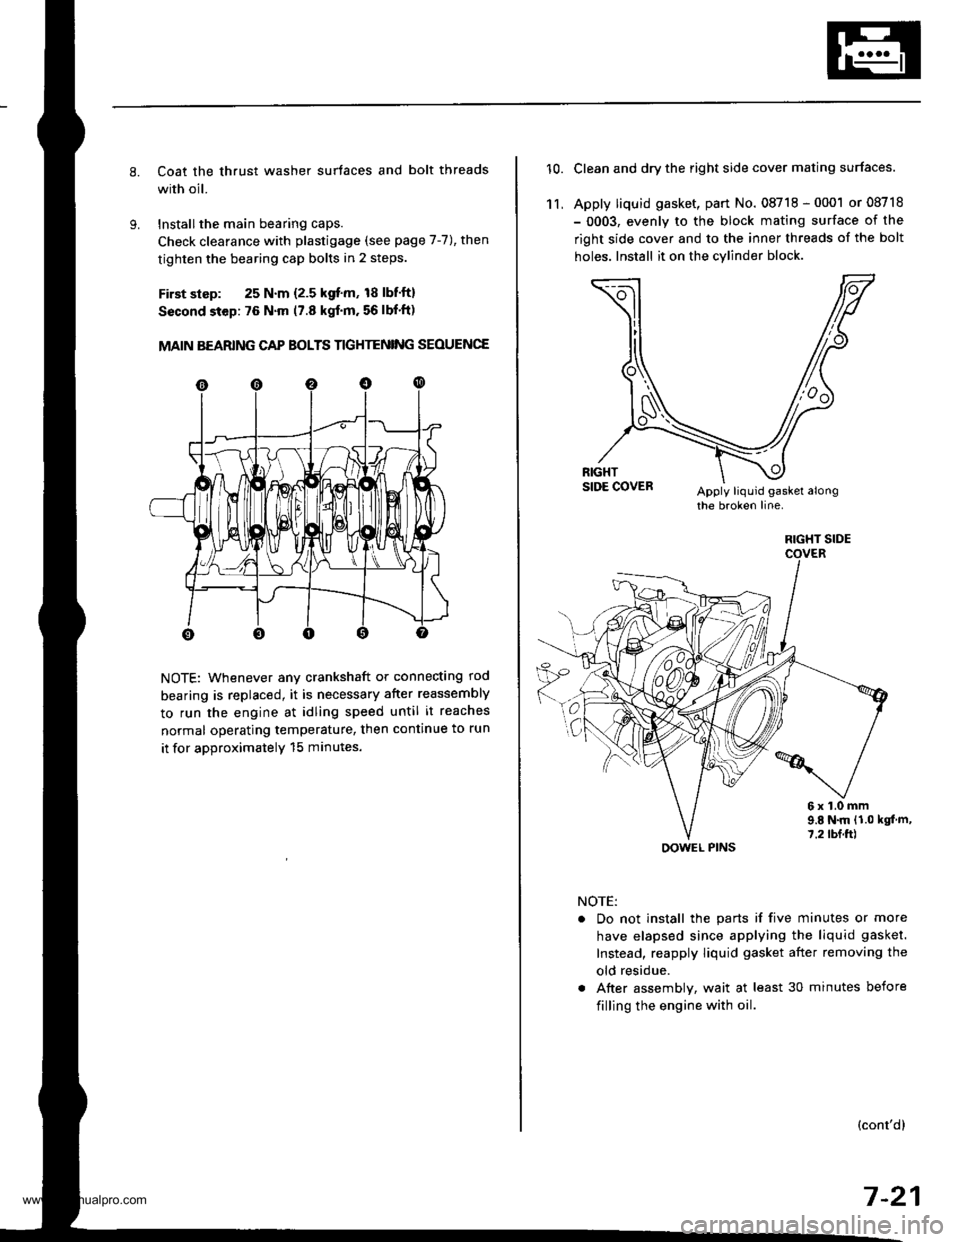 HONDA CR-V 1999 RD1-RD3 / 1.G Workshop Manual 
Coat the thrust washer surtaces and bolt threads
with oil.
Installthe main bearing caps.
Check clearance with plastigage (see page 7-7), then
tighten the bearing cap bolts in 2 steps.
First slsp: 25 